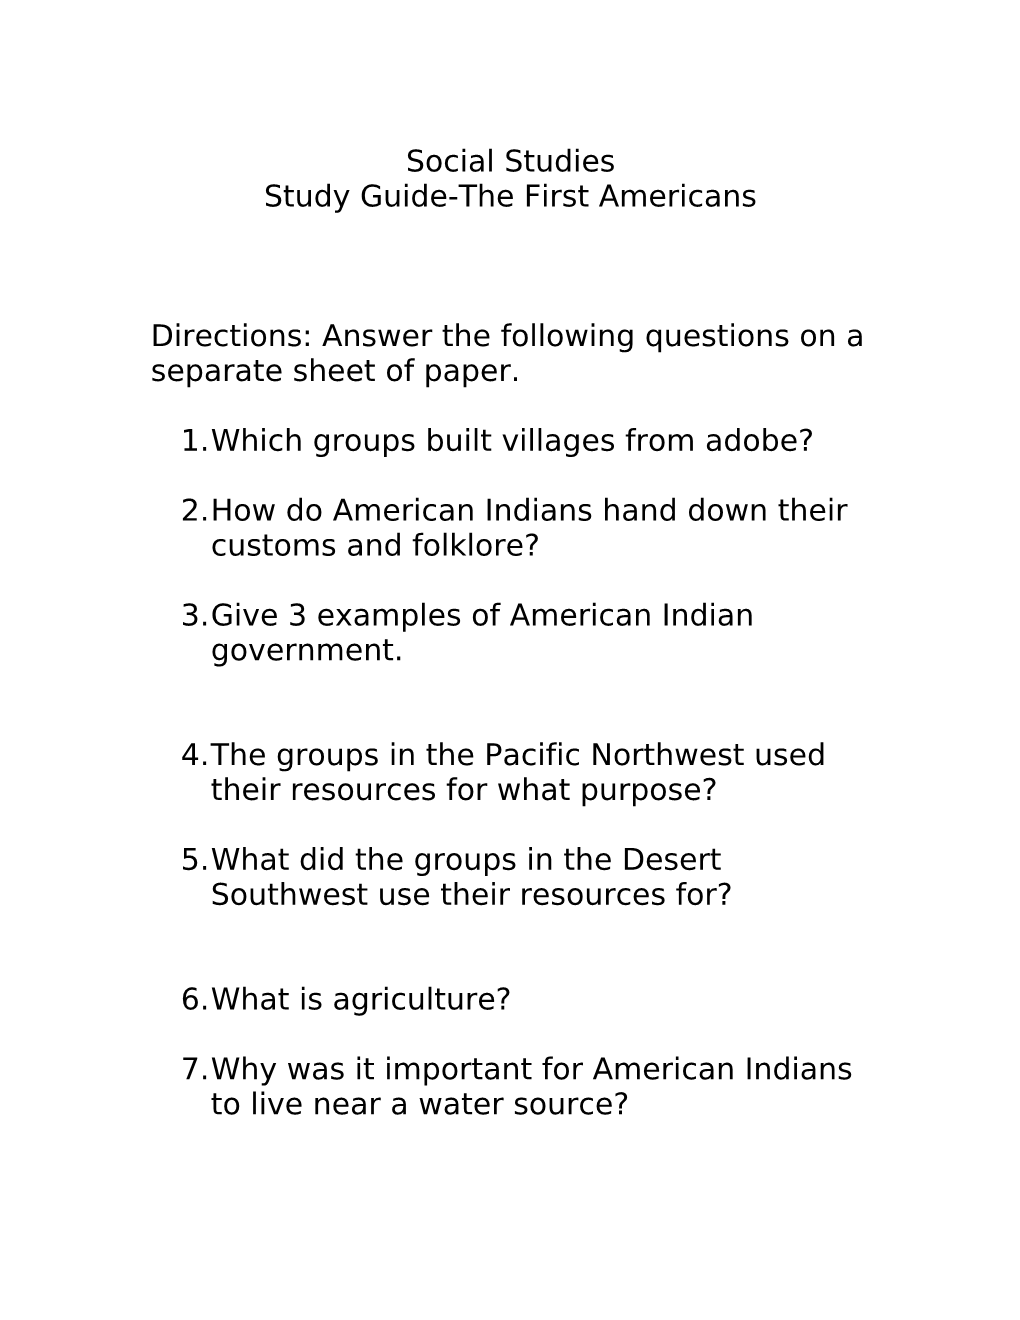 Study Guide-The First Americans